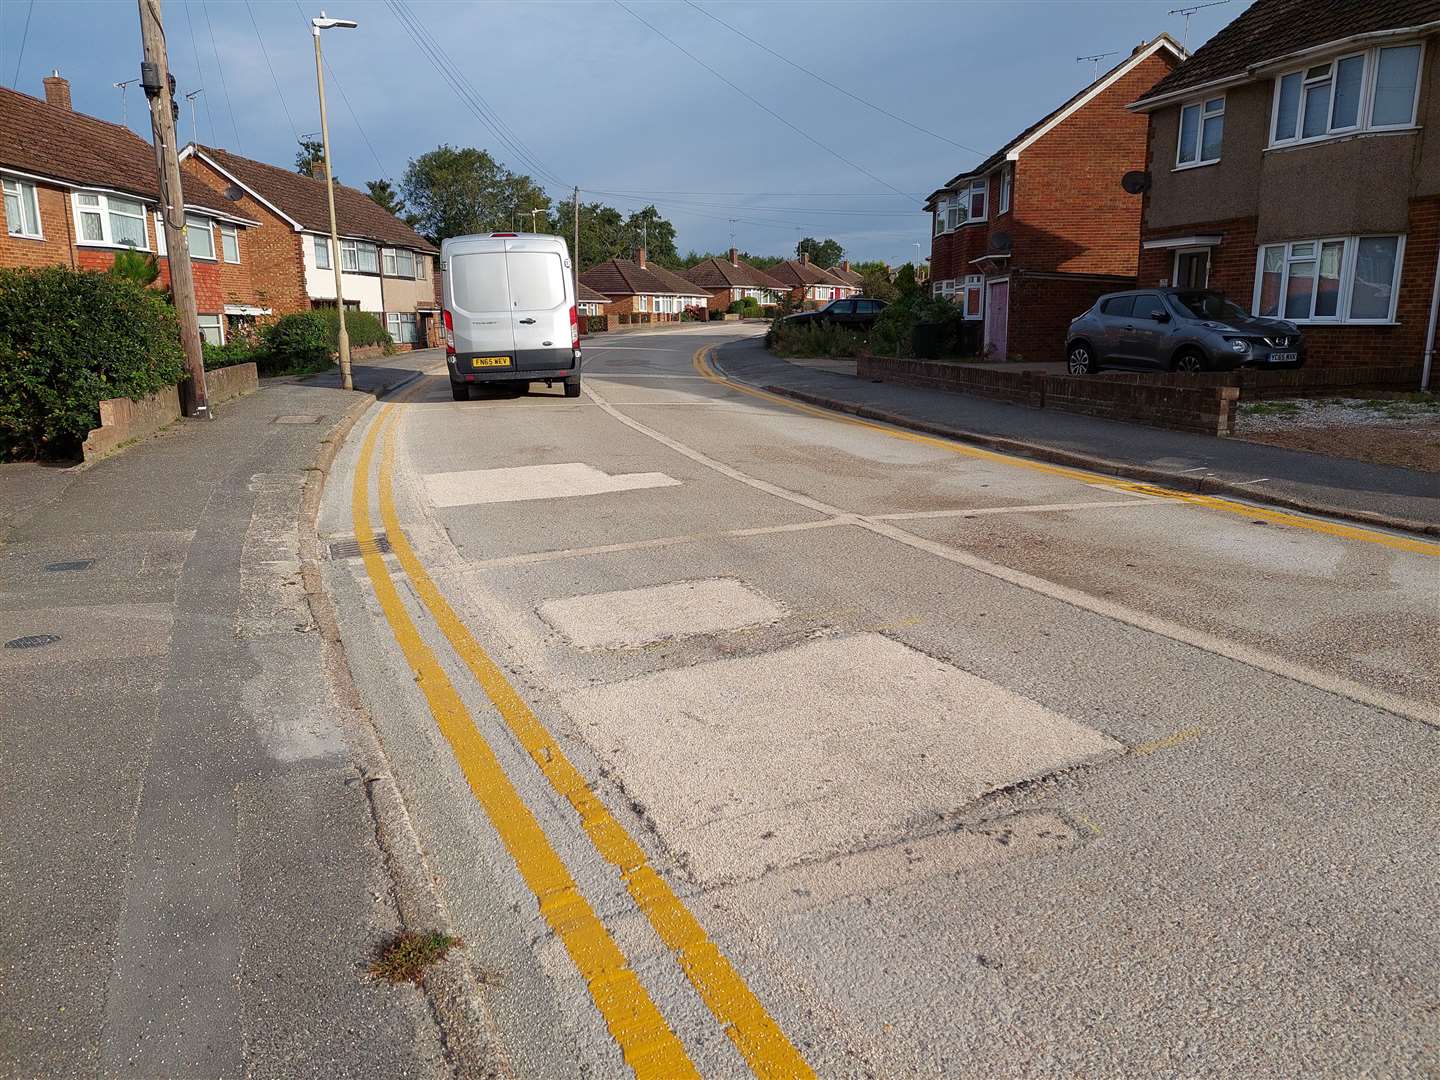 Bybrook Road has been described as a "patchwork quilt"; it has been resurfaced between Canterbury Road and close to Nine Acres